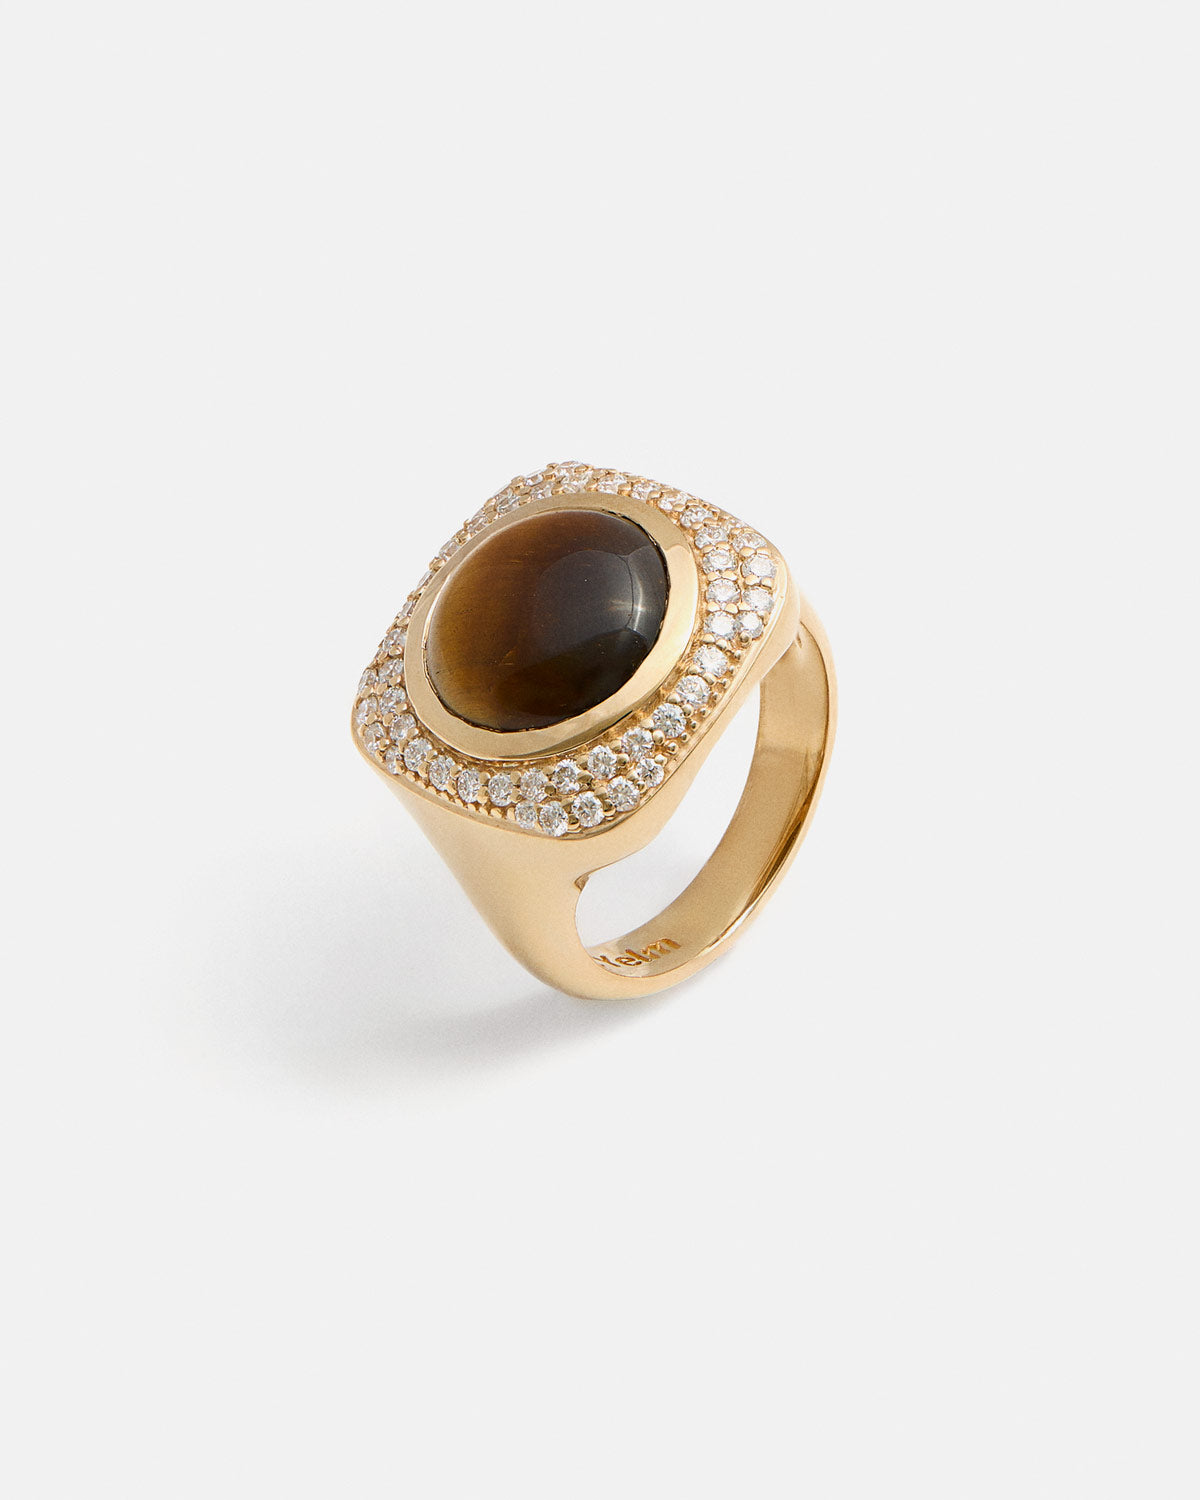 Doli Ring in 14k Yellow Gold with Tiger Eye Quartz and Lab-Grown Diamonds